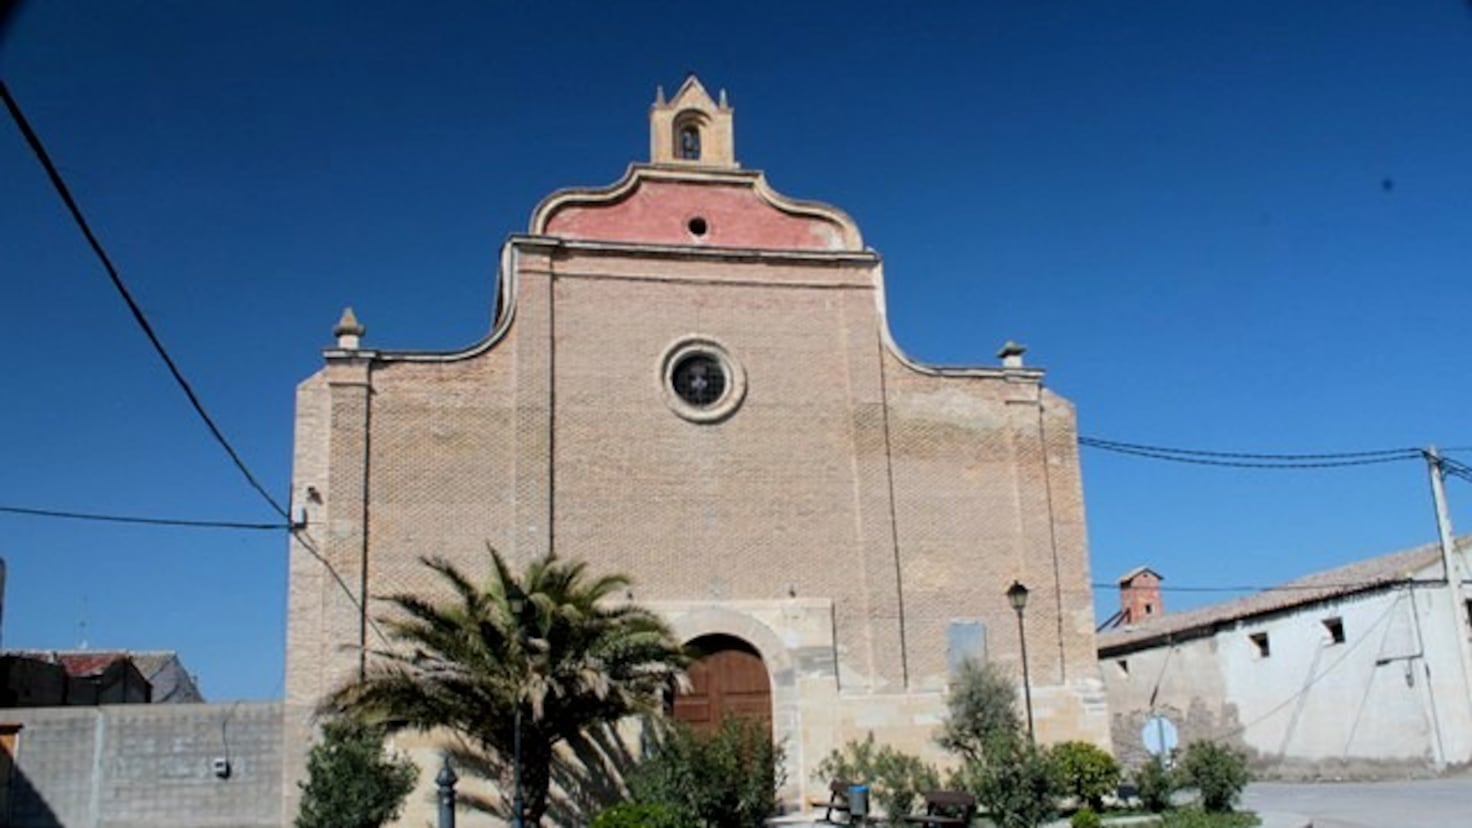 The town in Zaragoza that offers a free house and car with a job offer